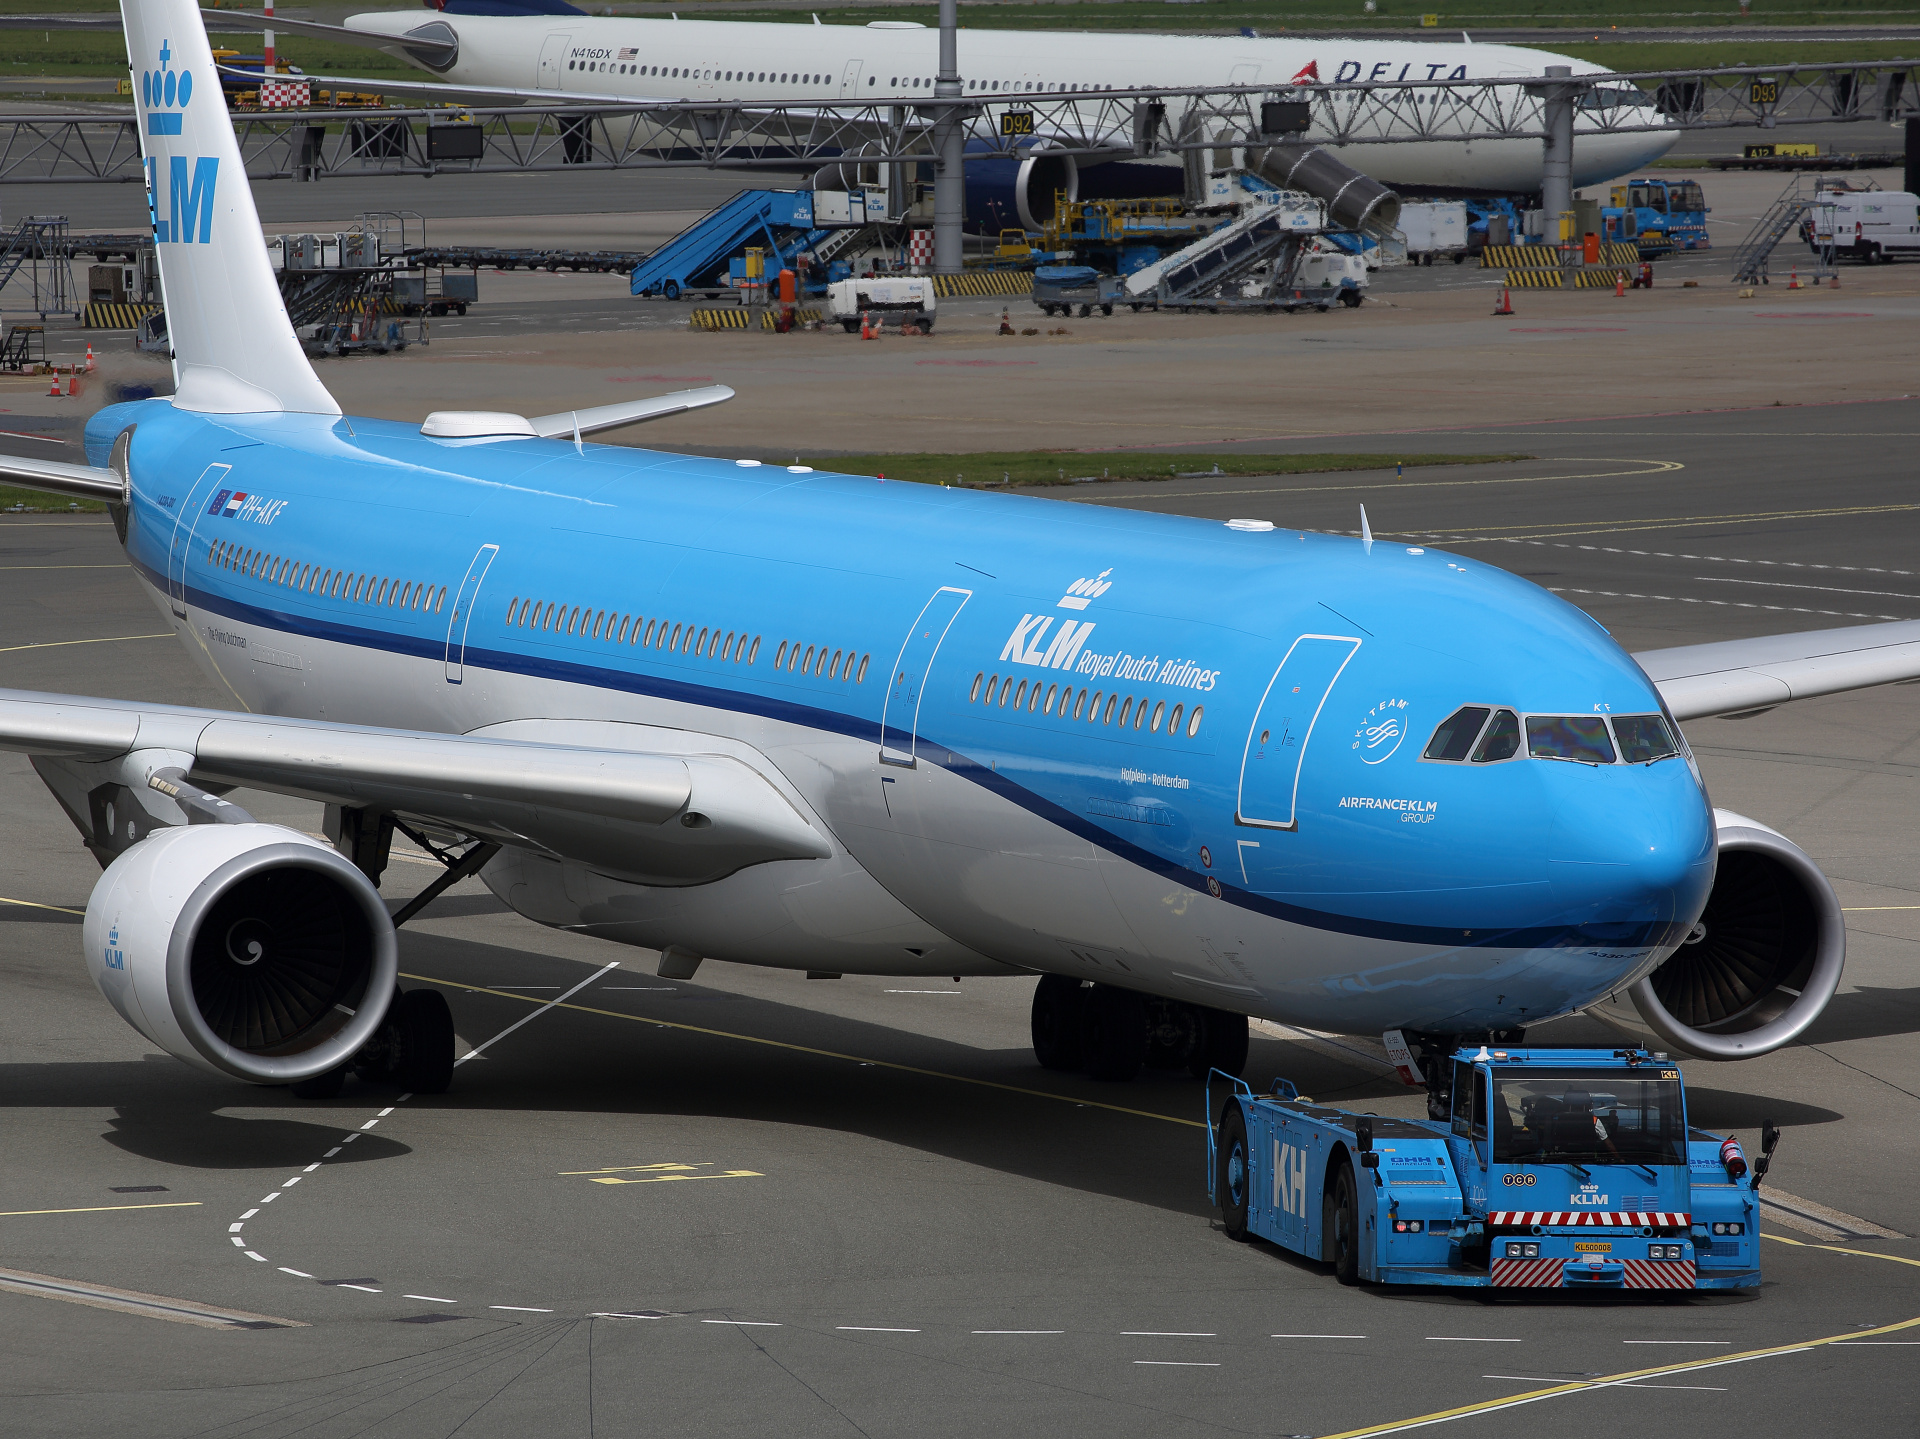 PH-AKF (new livery) (Aircraft » Schiphol Spotting » Airbus A330-300 » KLM Royal Dutch Airlines)